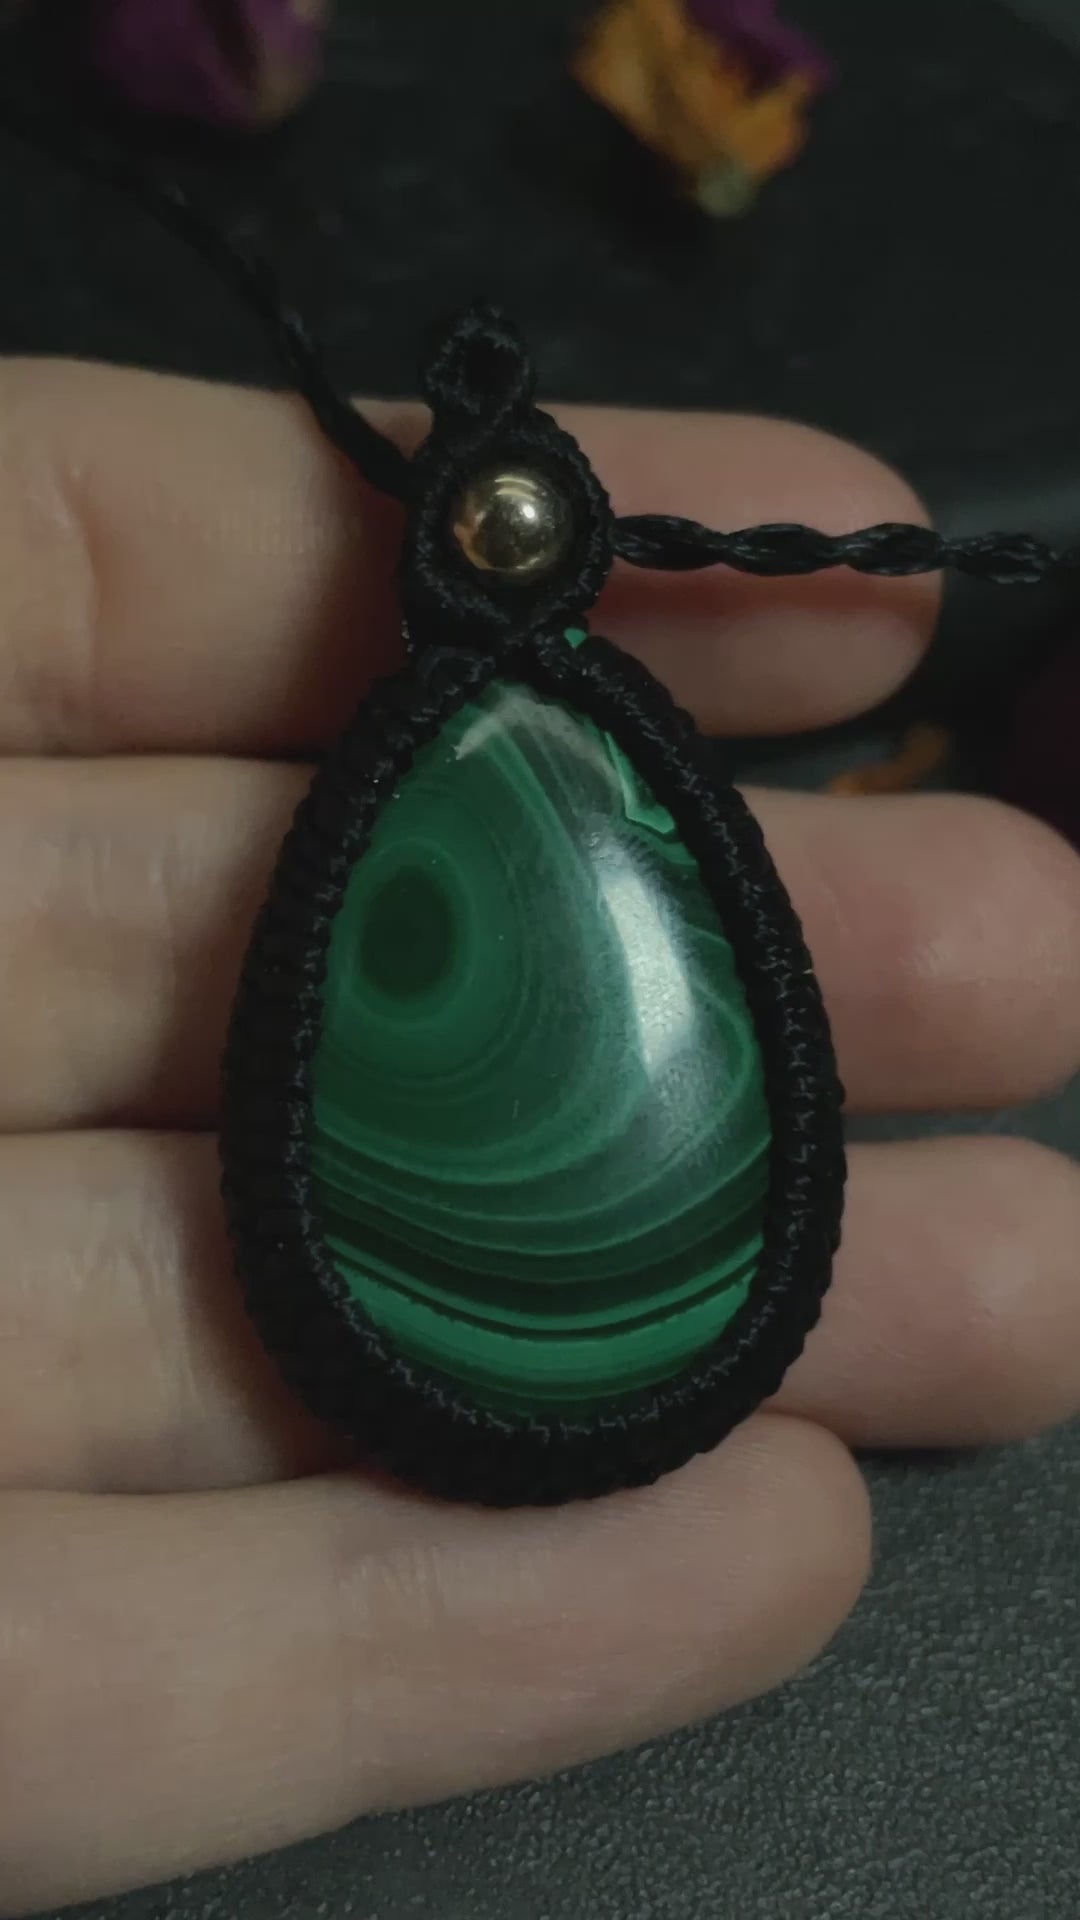 Pictured is a malachite cabochon wrapped in macrame thread. A gothic book and flowers are nearby.